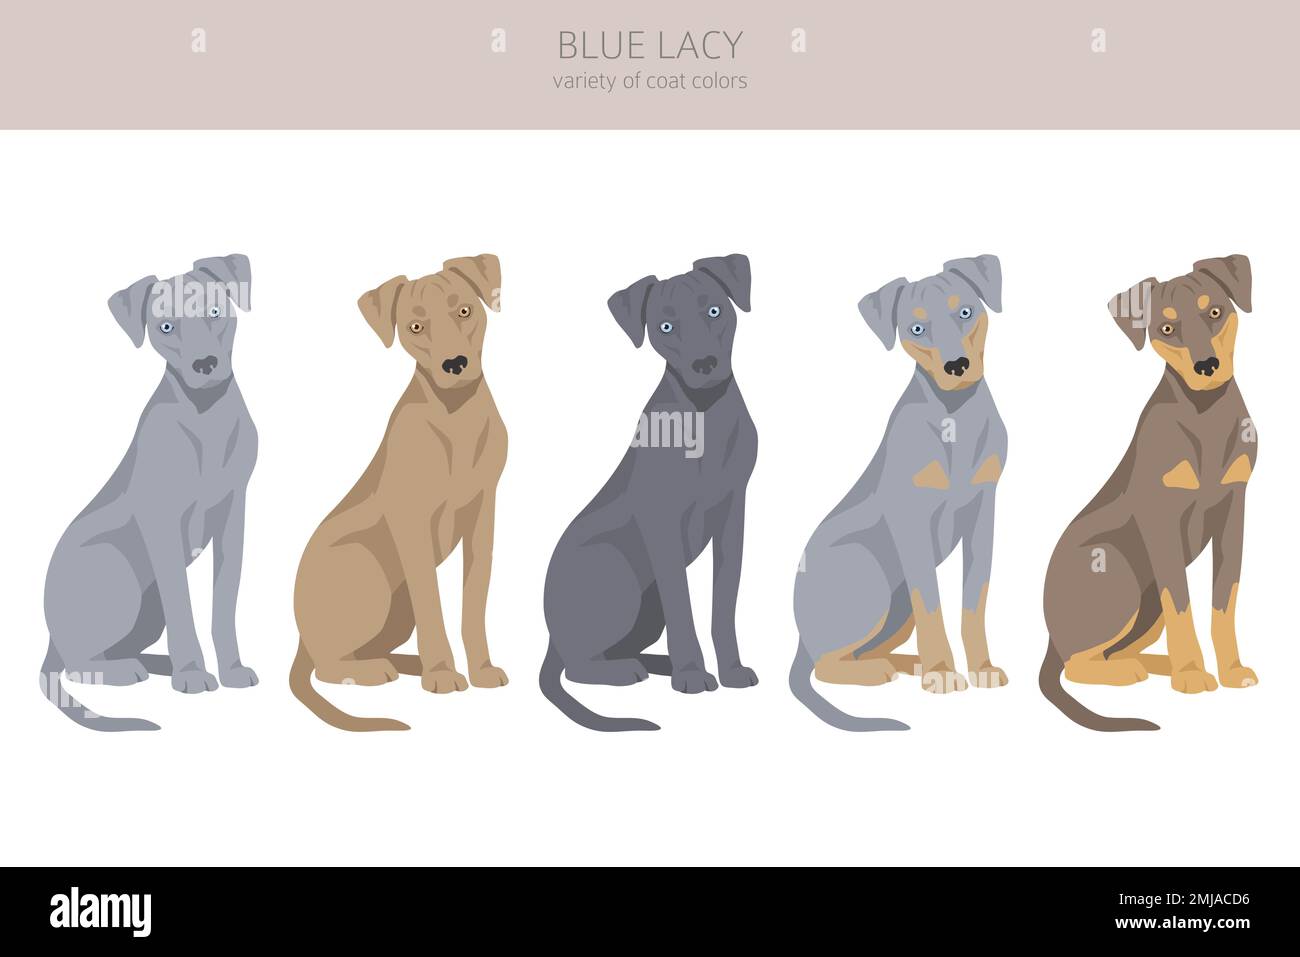 Blue Lacy clipart. Different coat colors and poses set. Vector ...